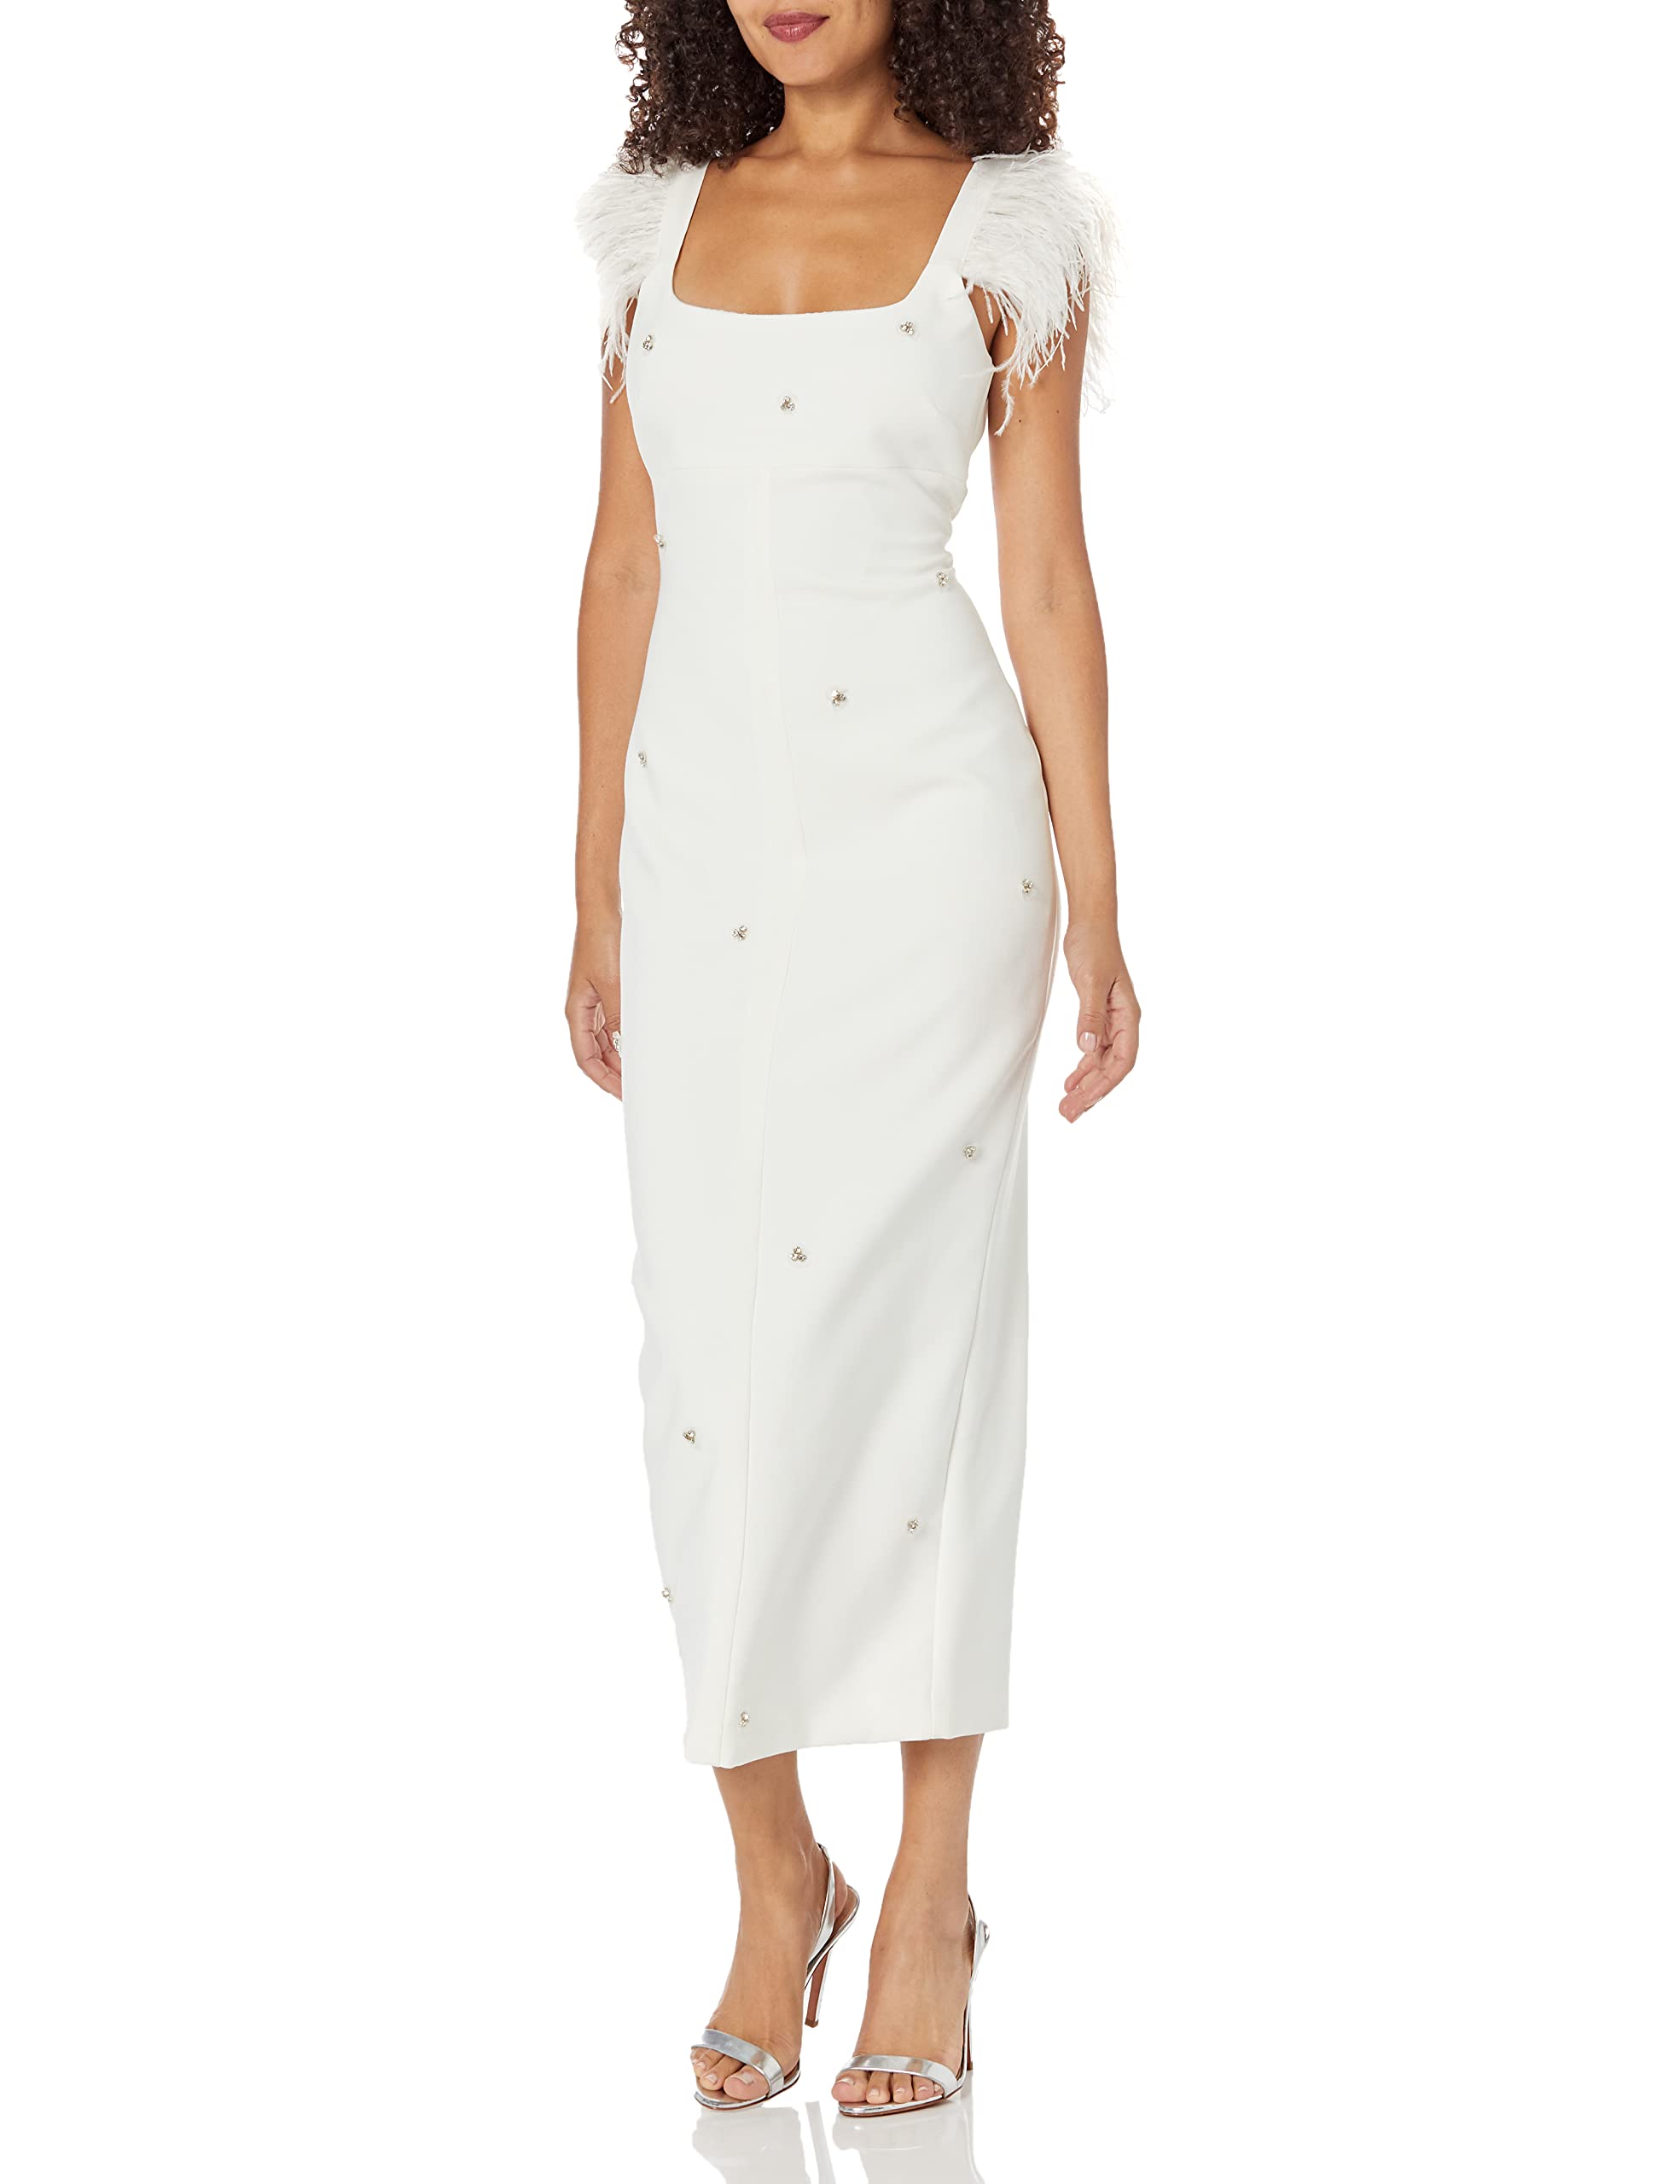 LIKELY Women's Cameron Cocktail Dress